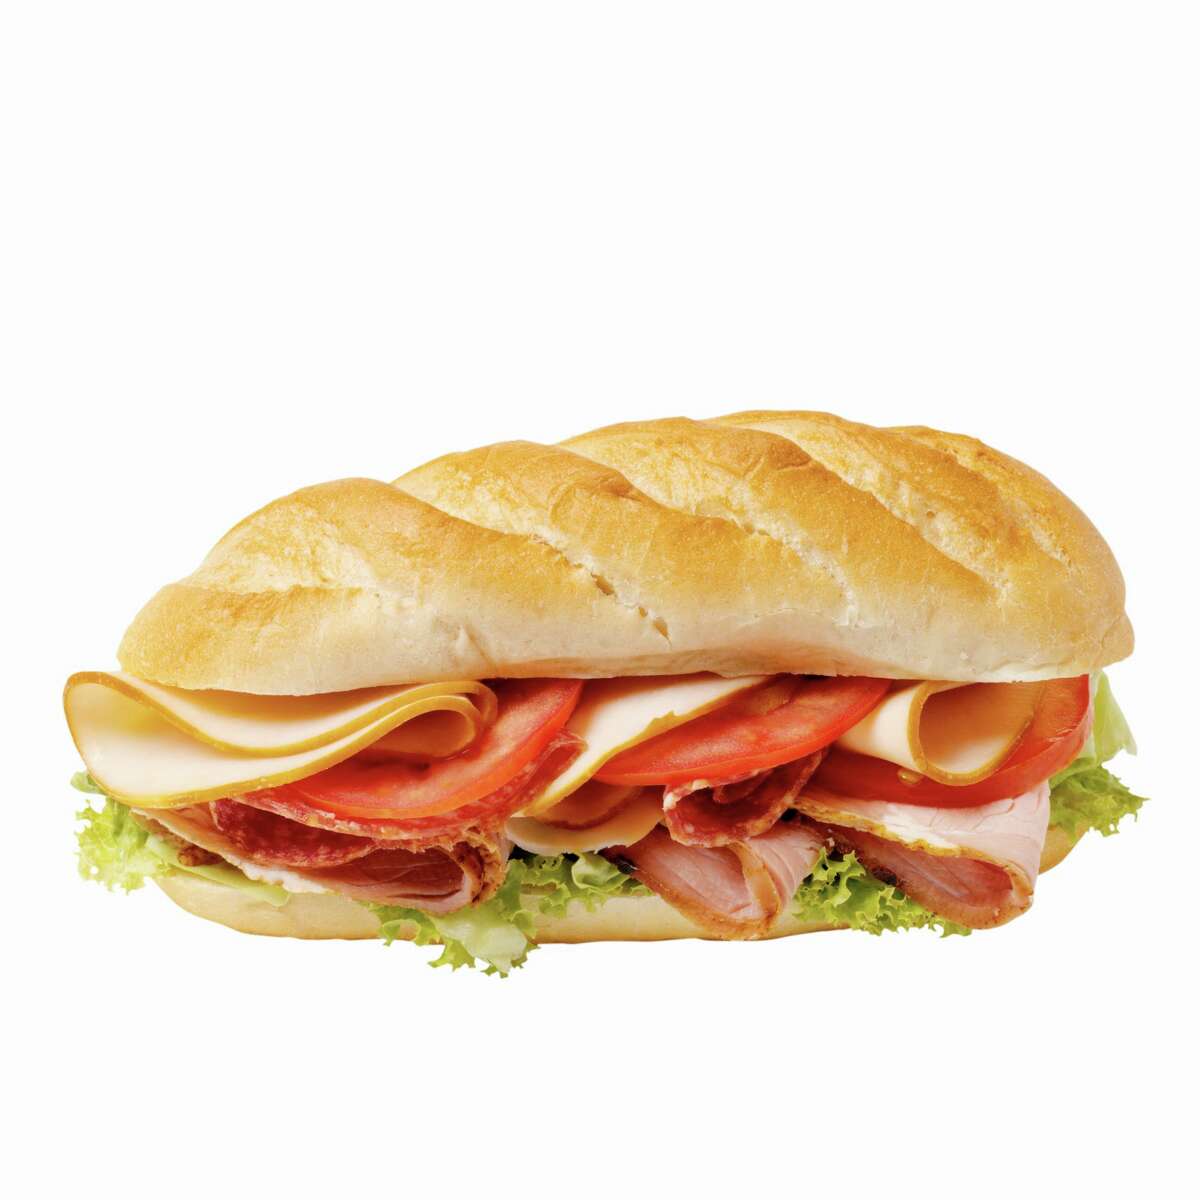 A new sales tax surcharge will take effect in in Connecticut for submarine sandwiches and other prepared foods.